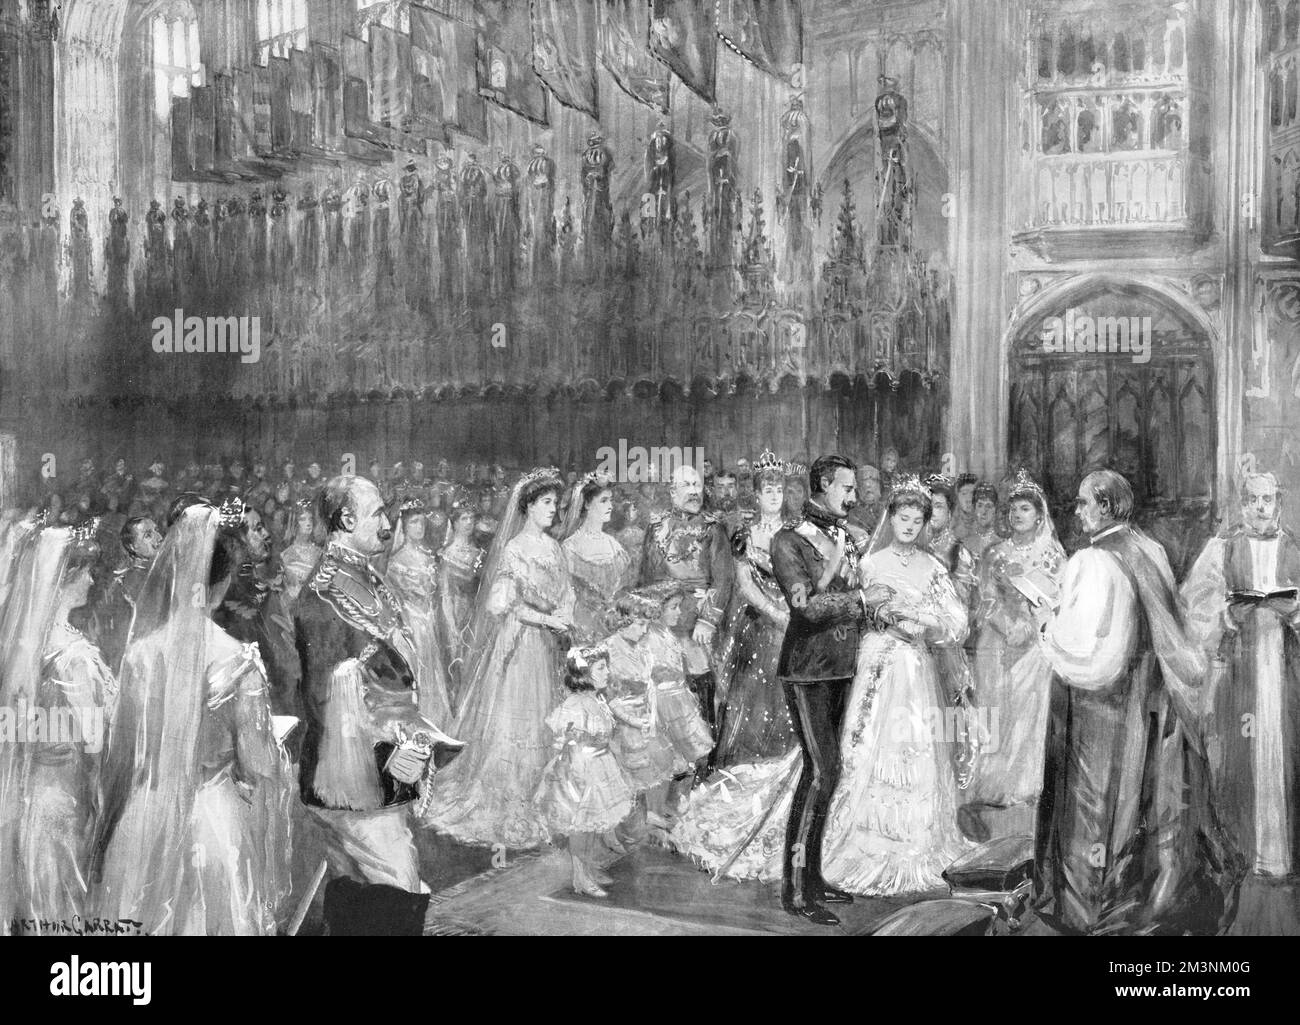 Scene at the wedding ceremony of Princess Alice of Albany, later Countess of Athlone (1883-1981) and Prince Alexander of Teck, later Alexander Cambridge, 1st Earl of Athlone (1874-1957).  The wedding took place on 10 February 1904 at St George's Chapel, Windsor.  The Archbishop of Canterbury officiated.  Behind the couple are three young bridesmaids: Princess Helen of Waldeck-Pyrmont (age 5), Princess Mary of Wales (age 7), and Princess Mary of Teck (age 7).  The two older bridesmaids behind them are Princess Margaret and Princess Patricia of Connaught.  King Edward VII and Queen Alexandra are Stock Photo